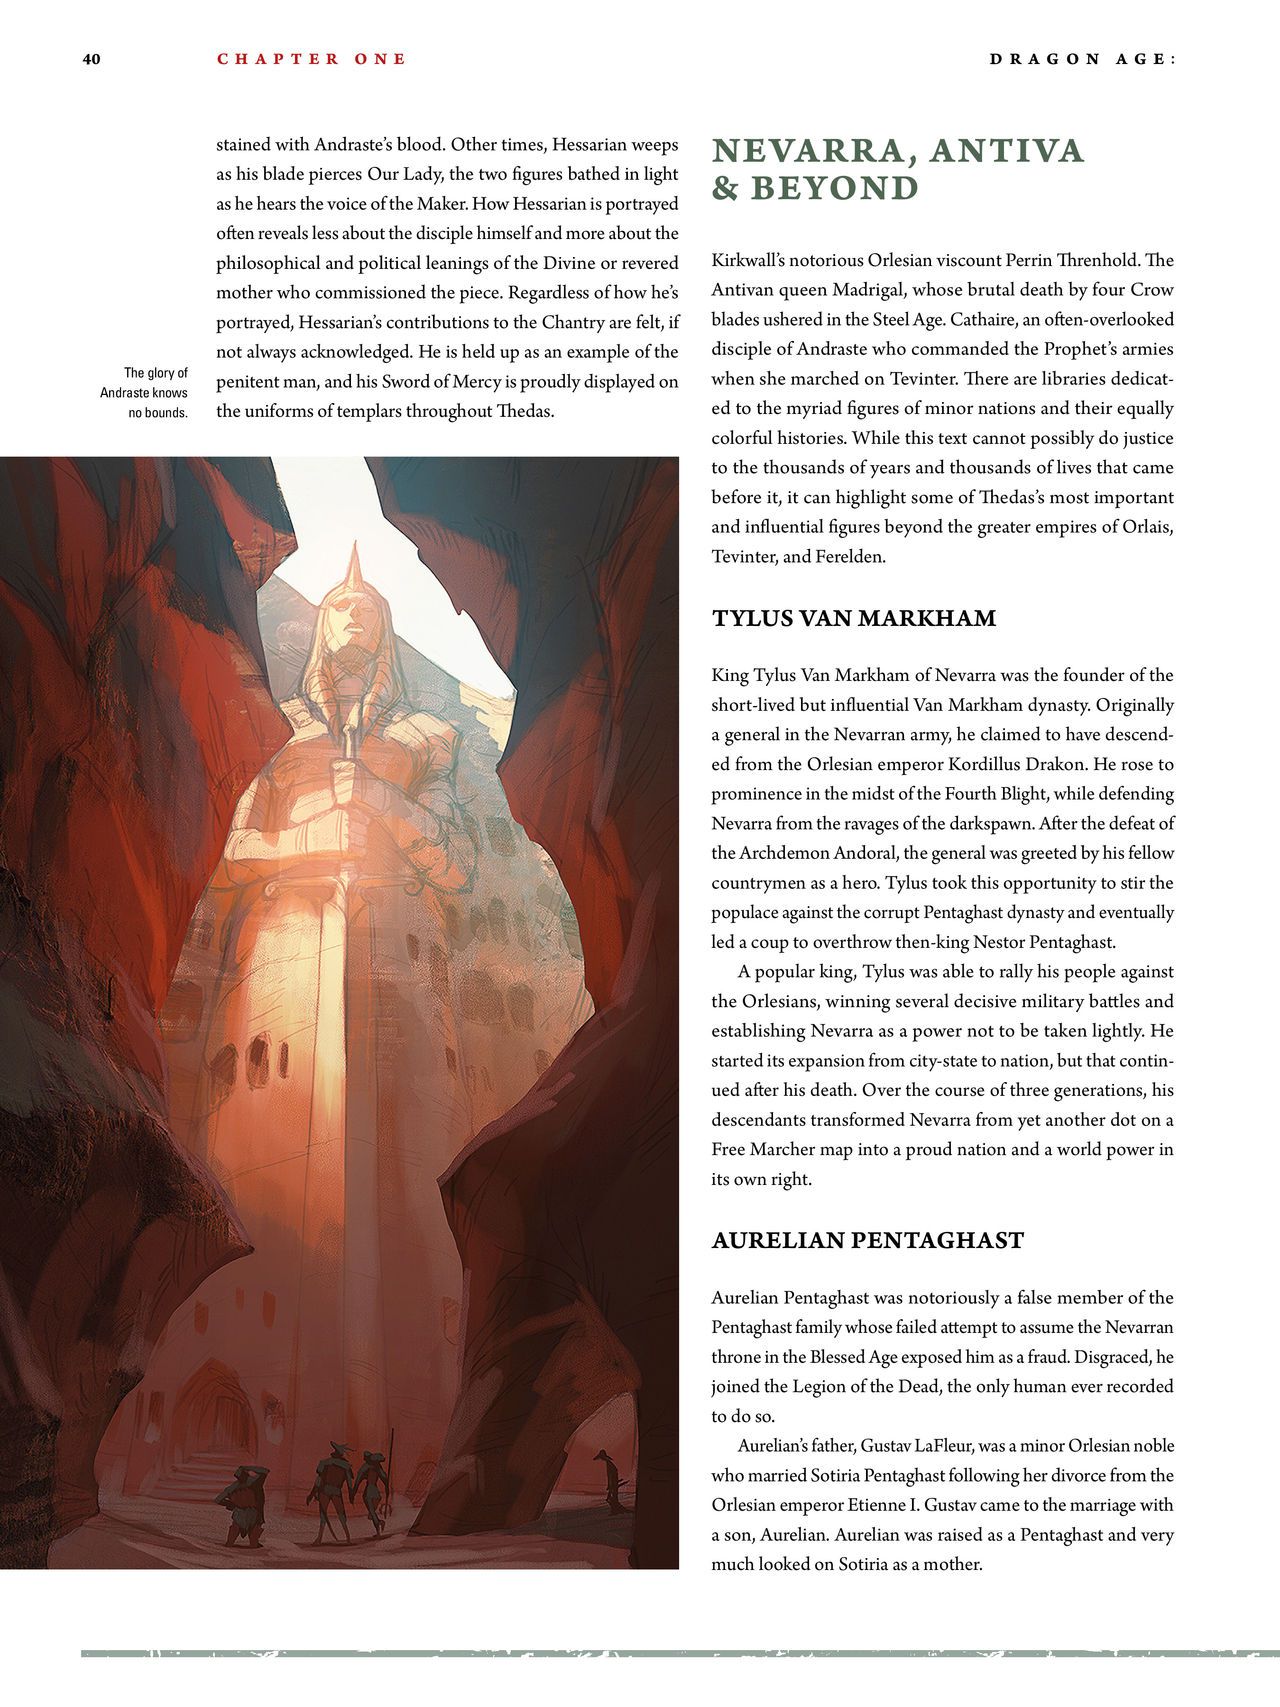 Dragon Age - The World of Thedas v02 37